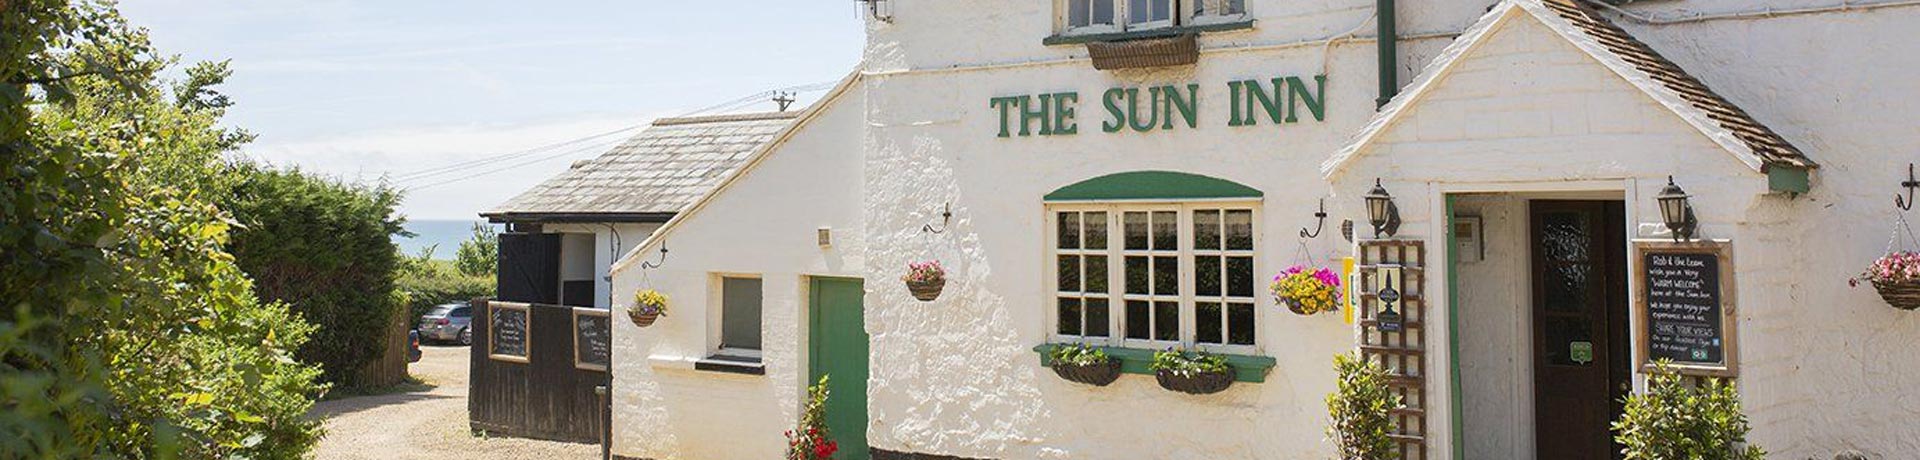 The best pubs for a Sunday roast on the Isle of Wight